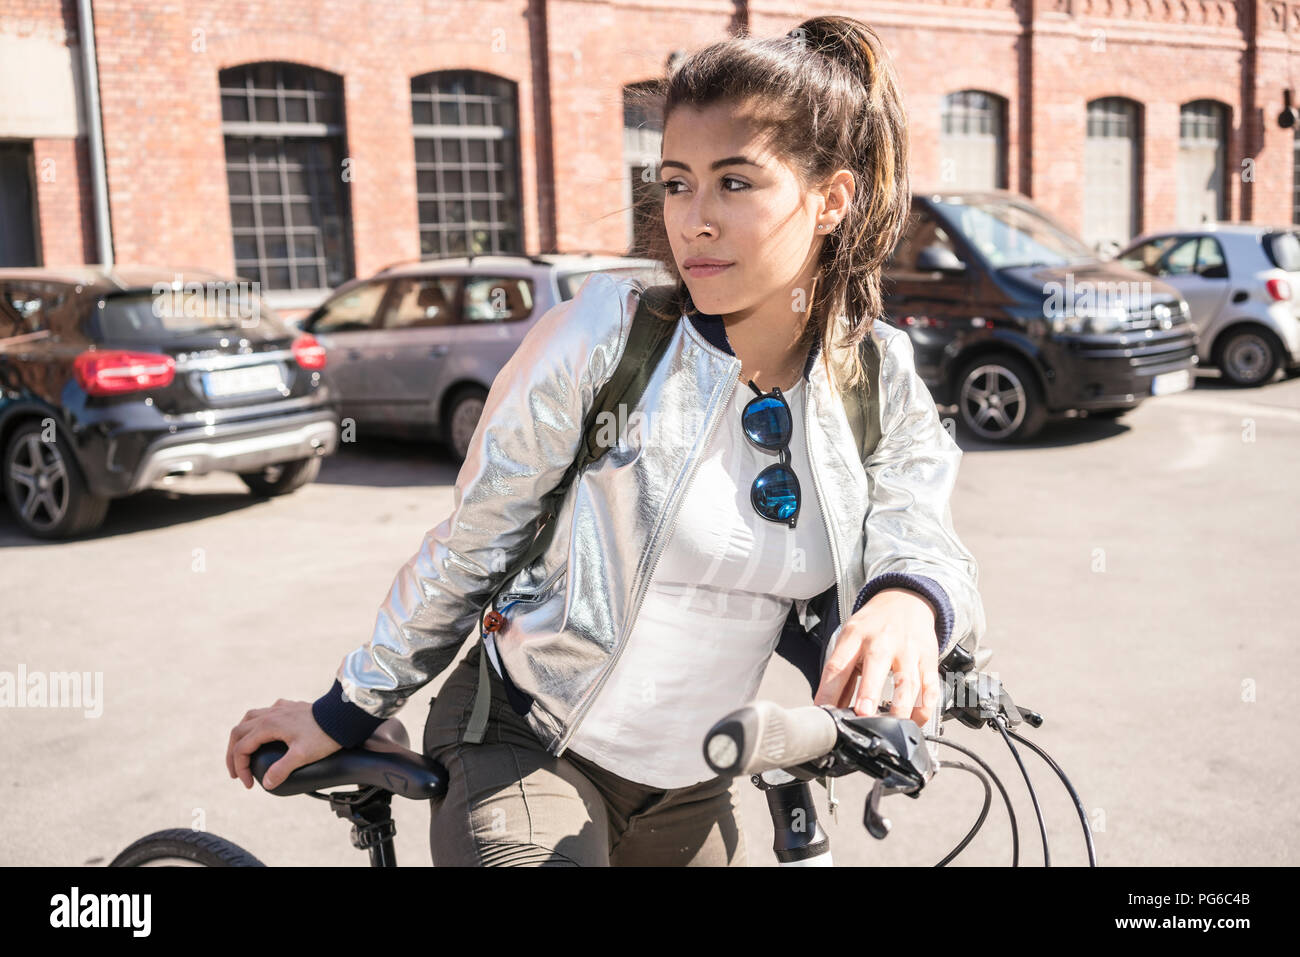 Portrait of young woman with bicycle Banque D'Images